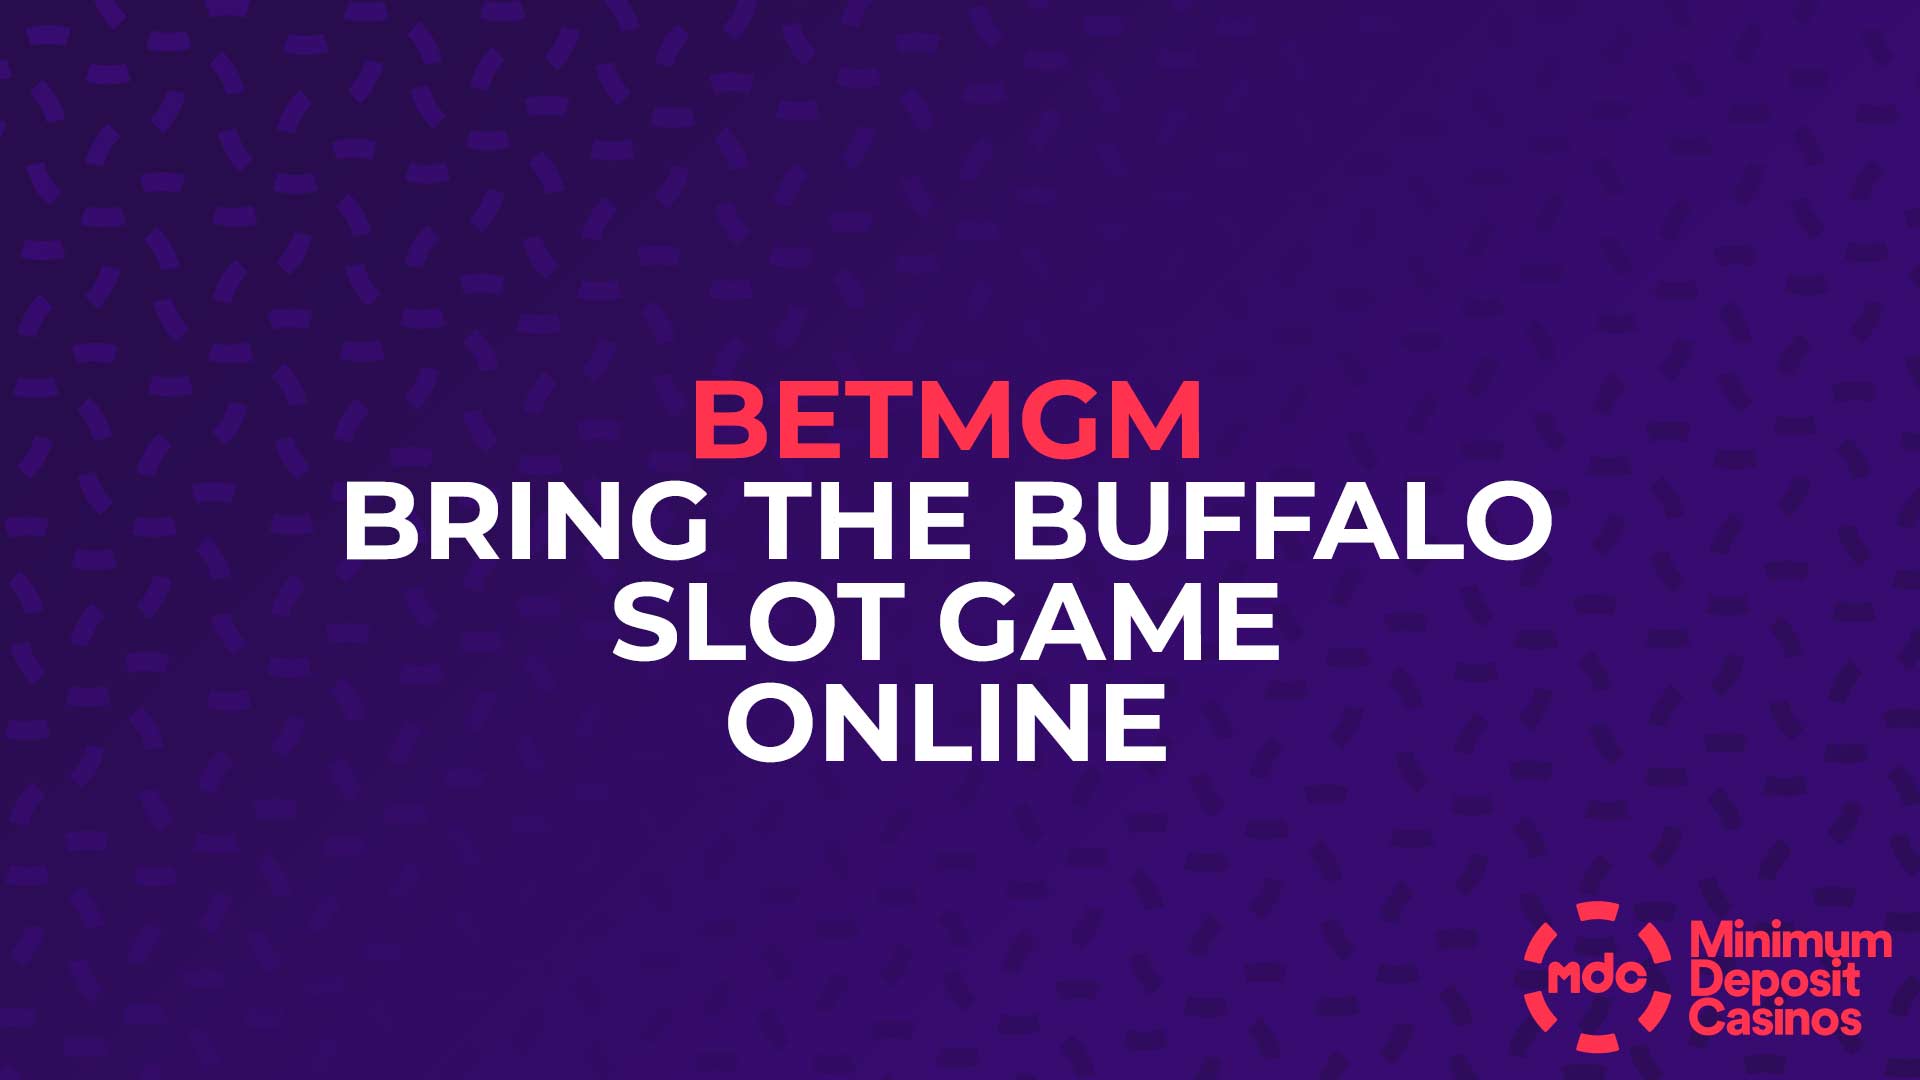 BetMGM expands its game offering in Ontario